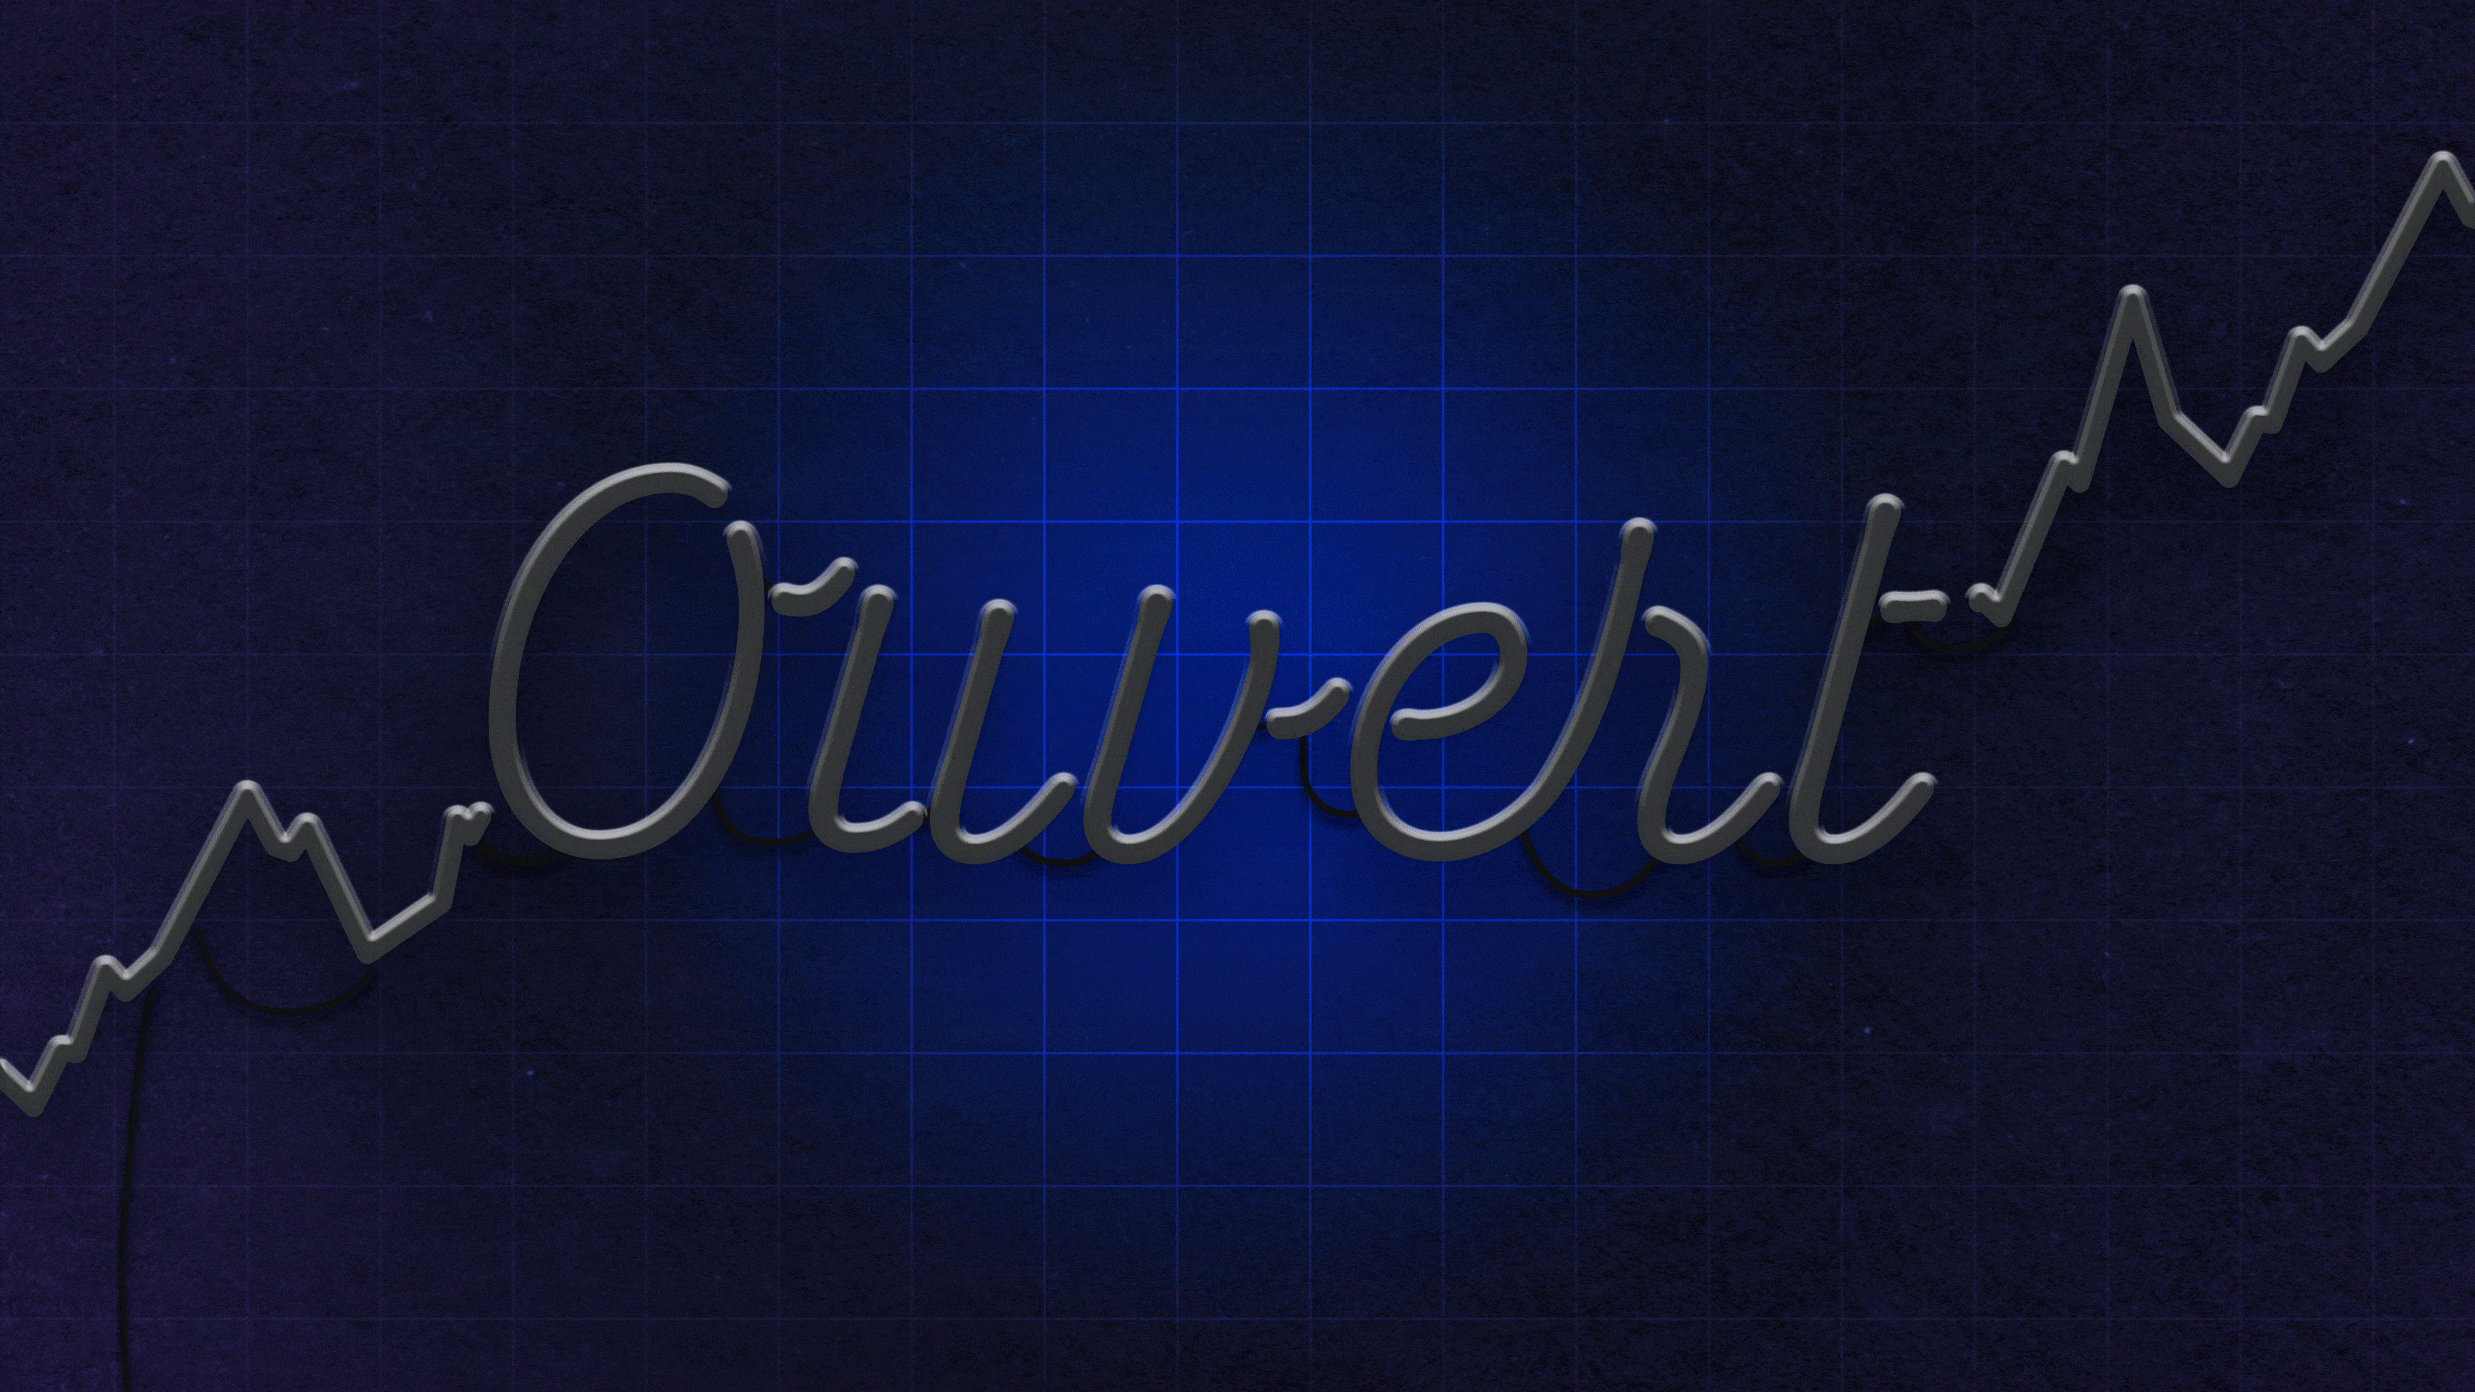 Illustration of a neon sign depicting a stock market chart and the word "Ouvert" that is animated to turn on.